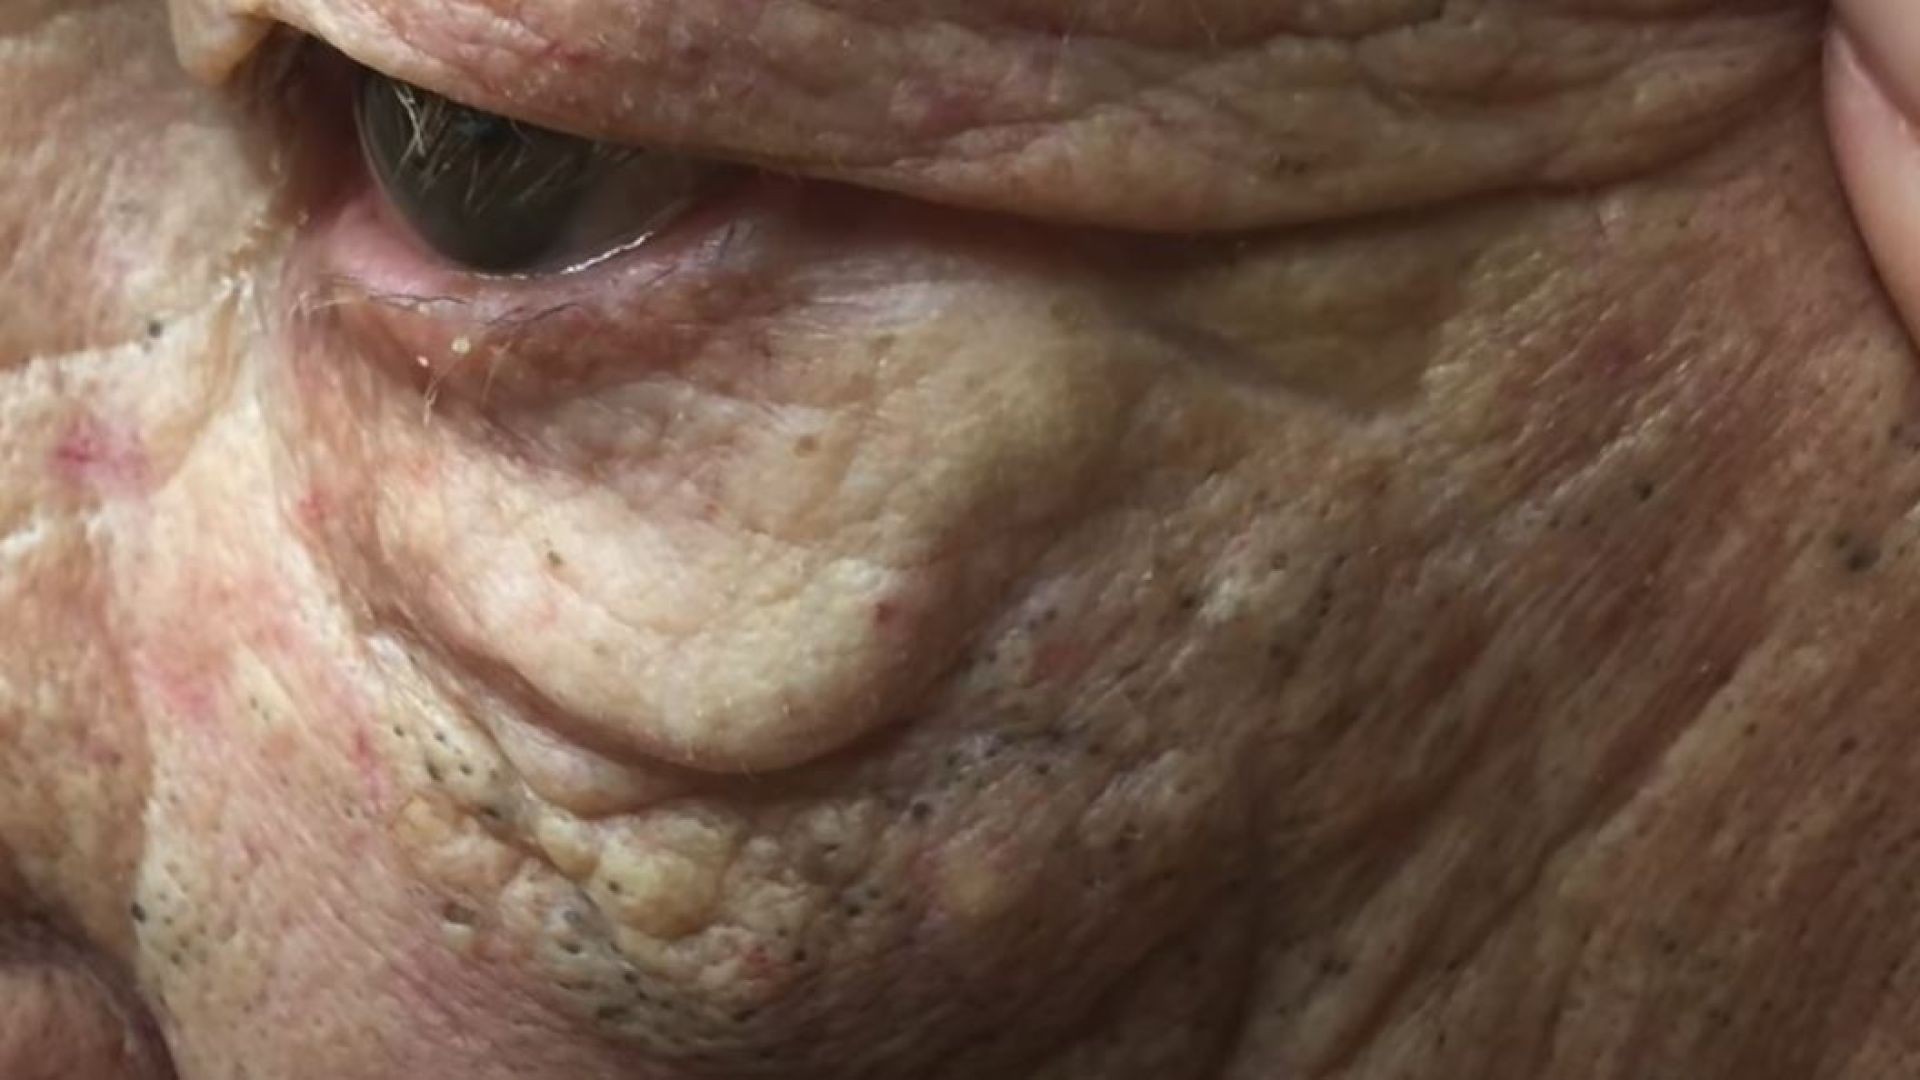 Don't miss these huge blackhead extractions in "The Fireman"